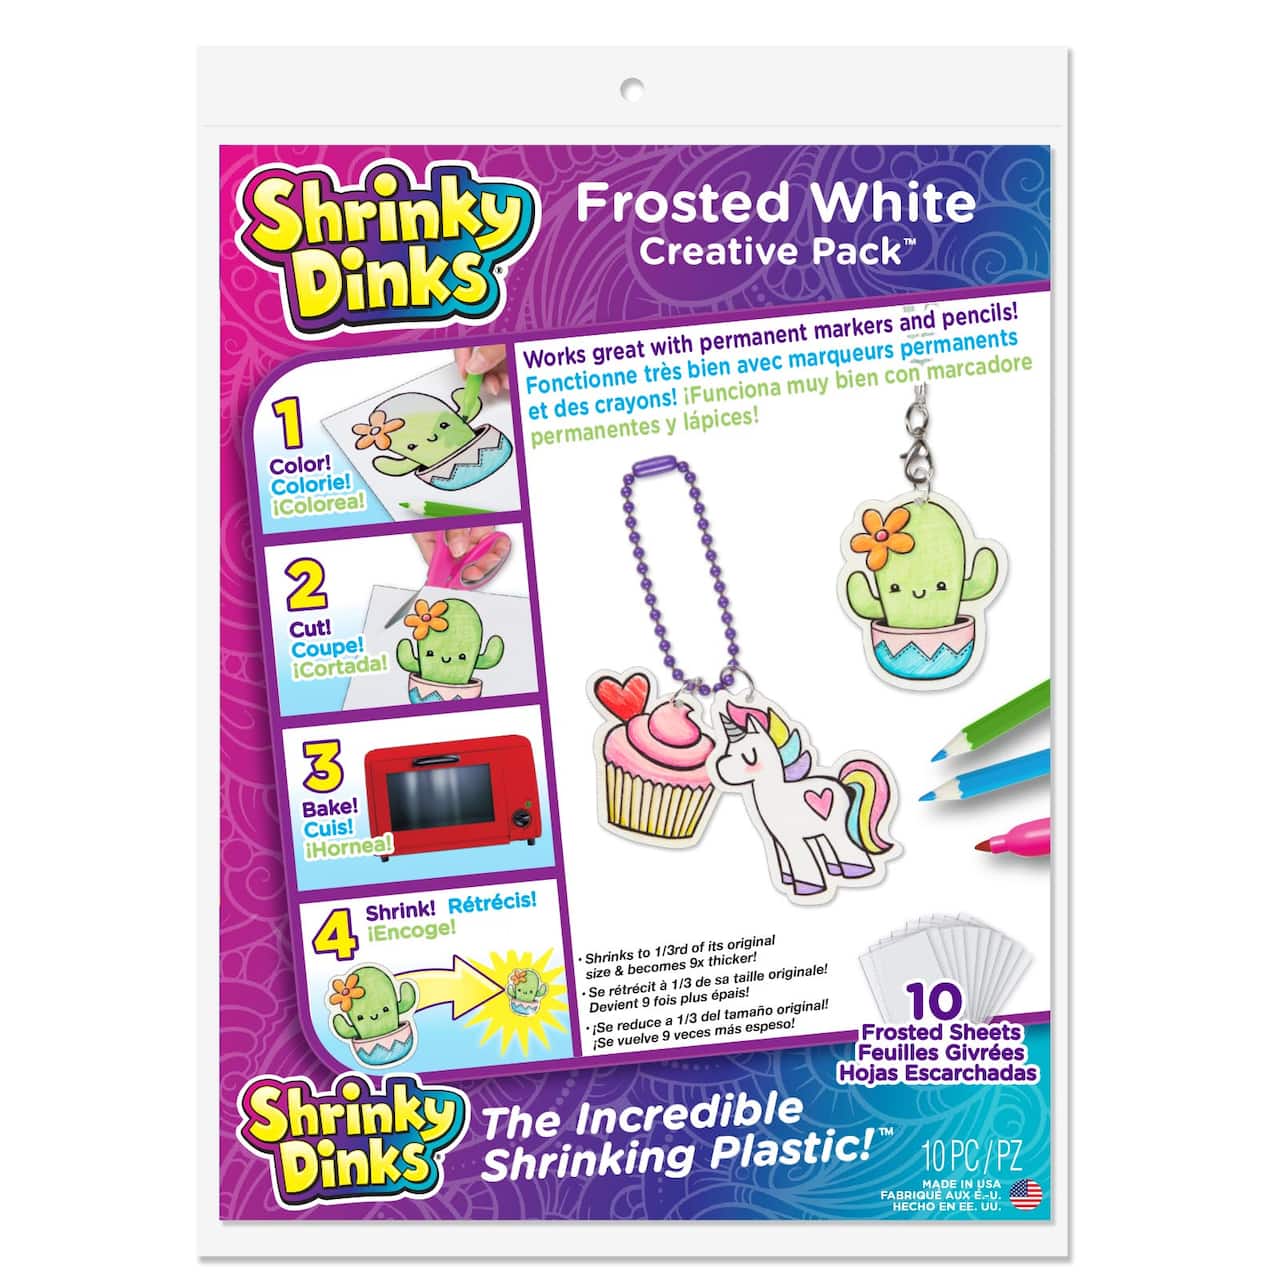 12 Packs: 10 ct. (120 total) Shrinky Dinks® Frosted White Creative